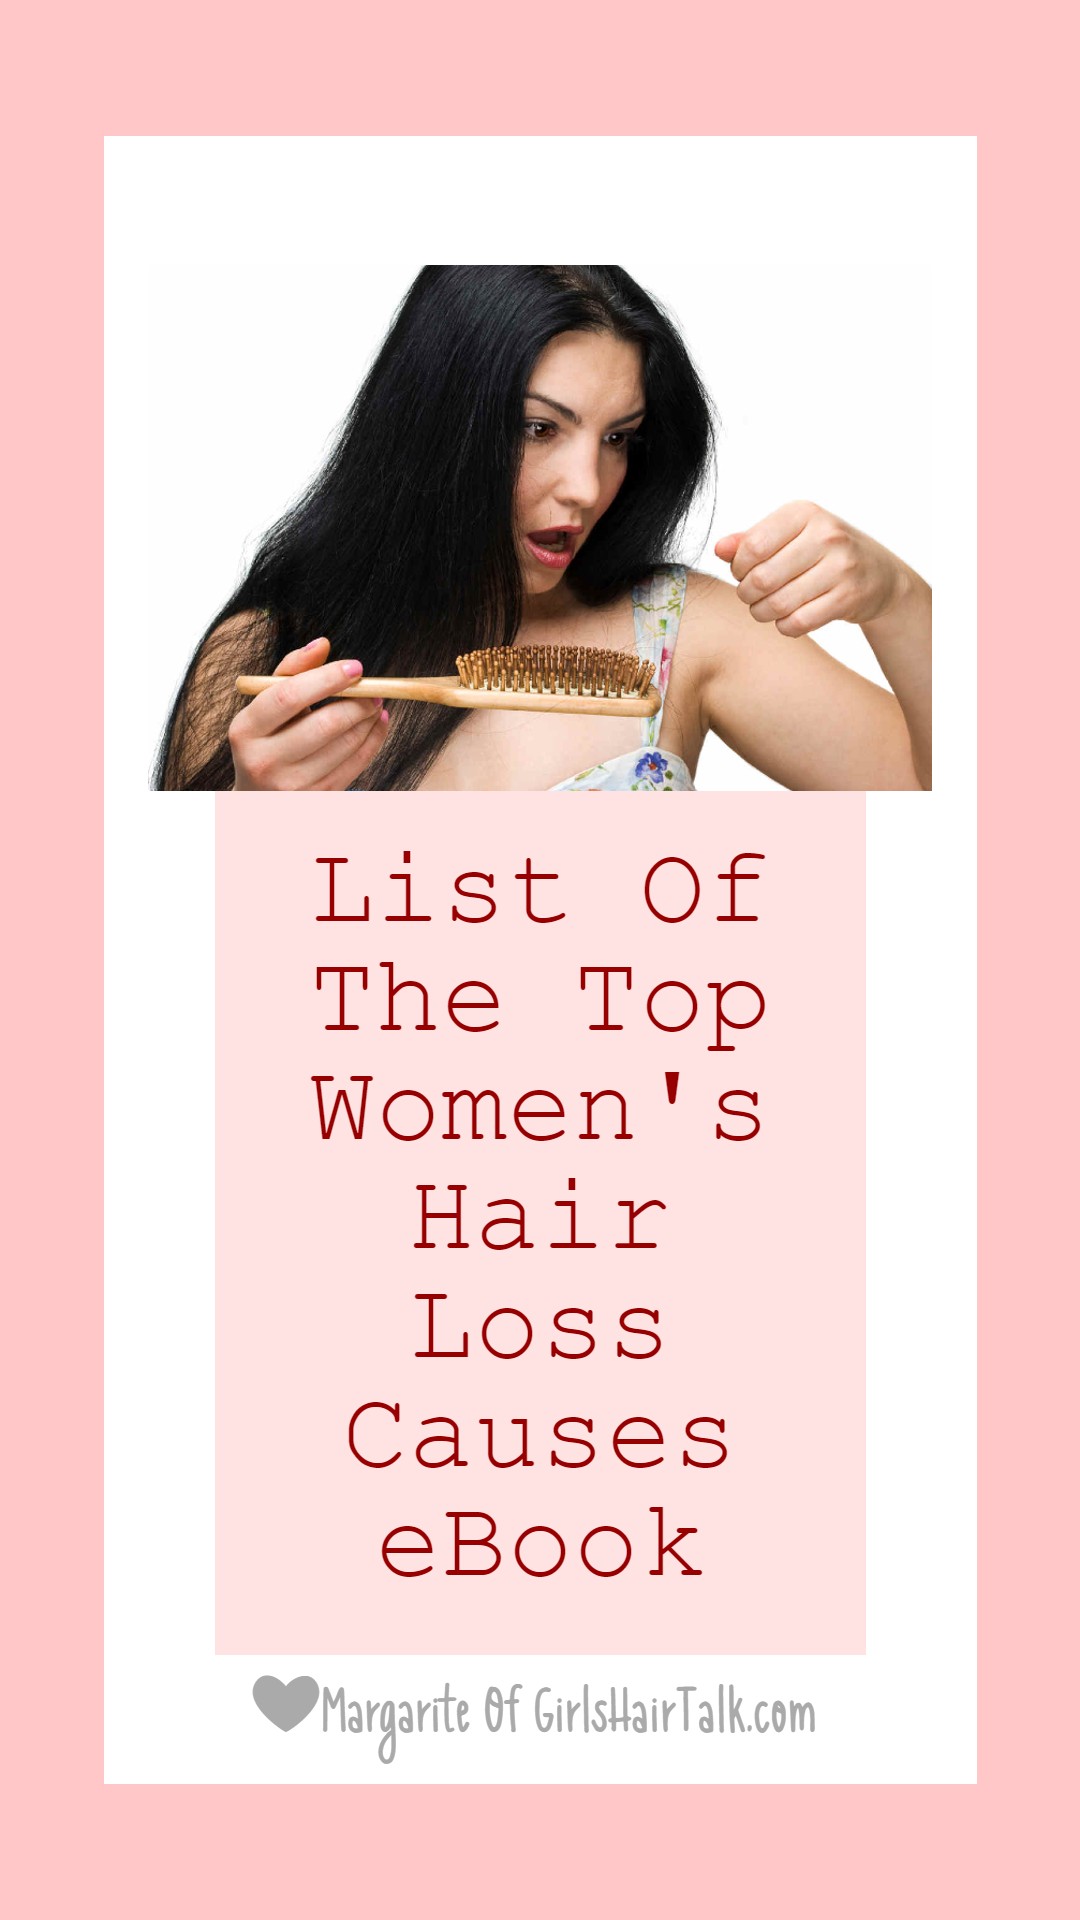 ebook what causes hair loss?